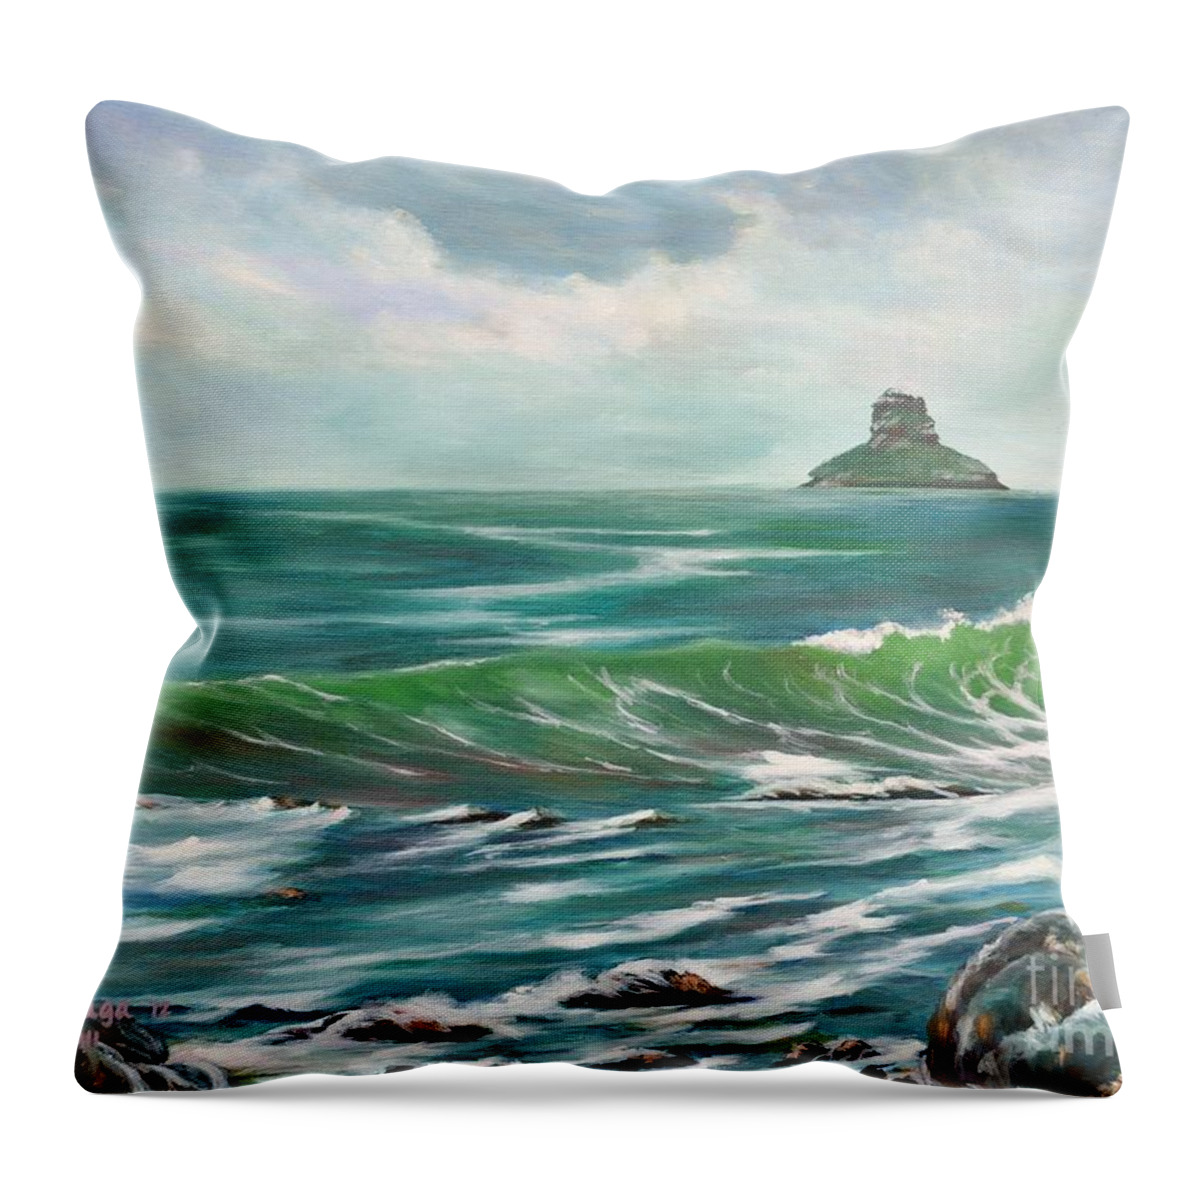 Seascape Throw Pillow featuring the painting Chinaman's Hat by Larry Geyrozaga